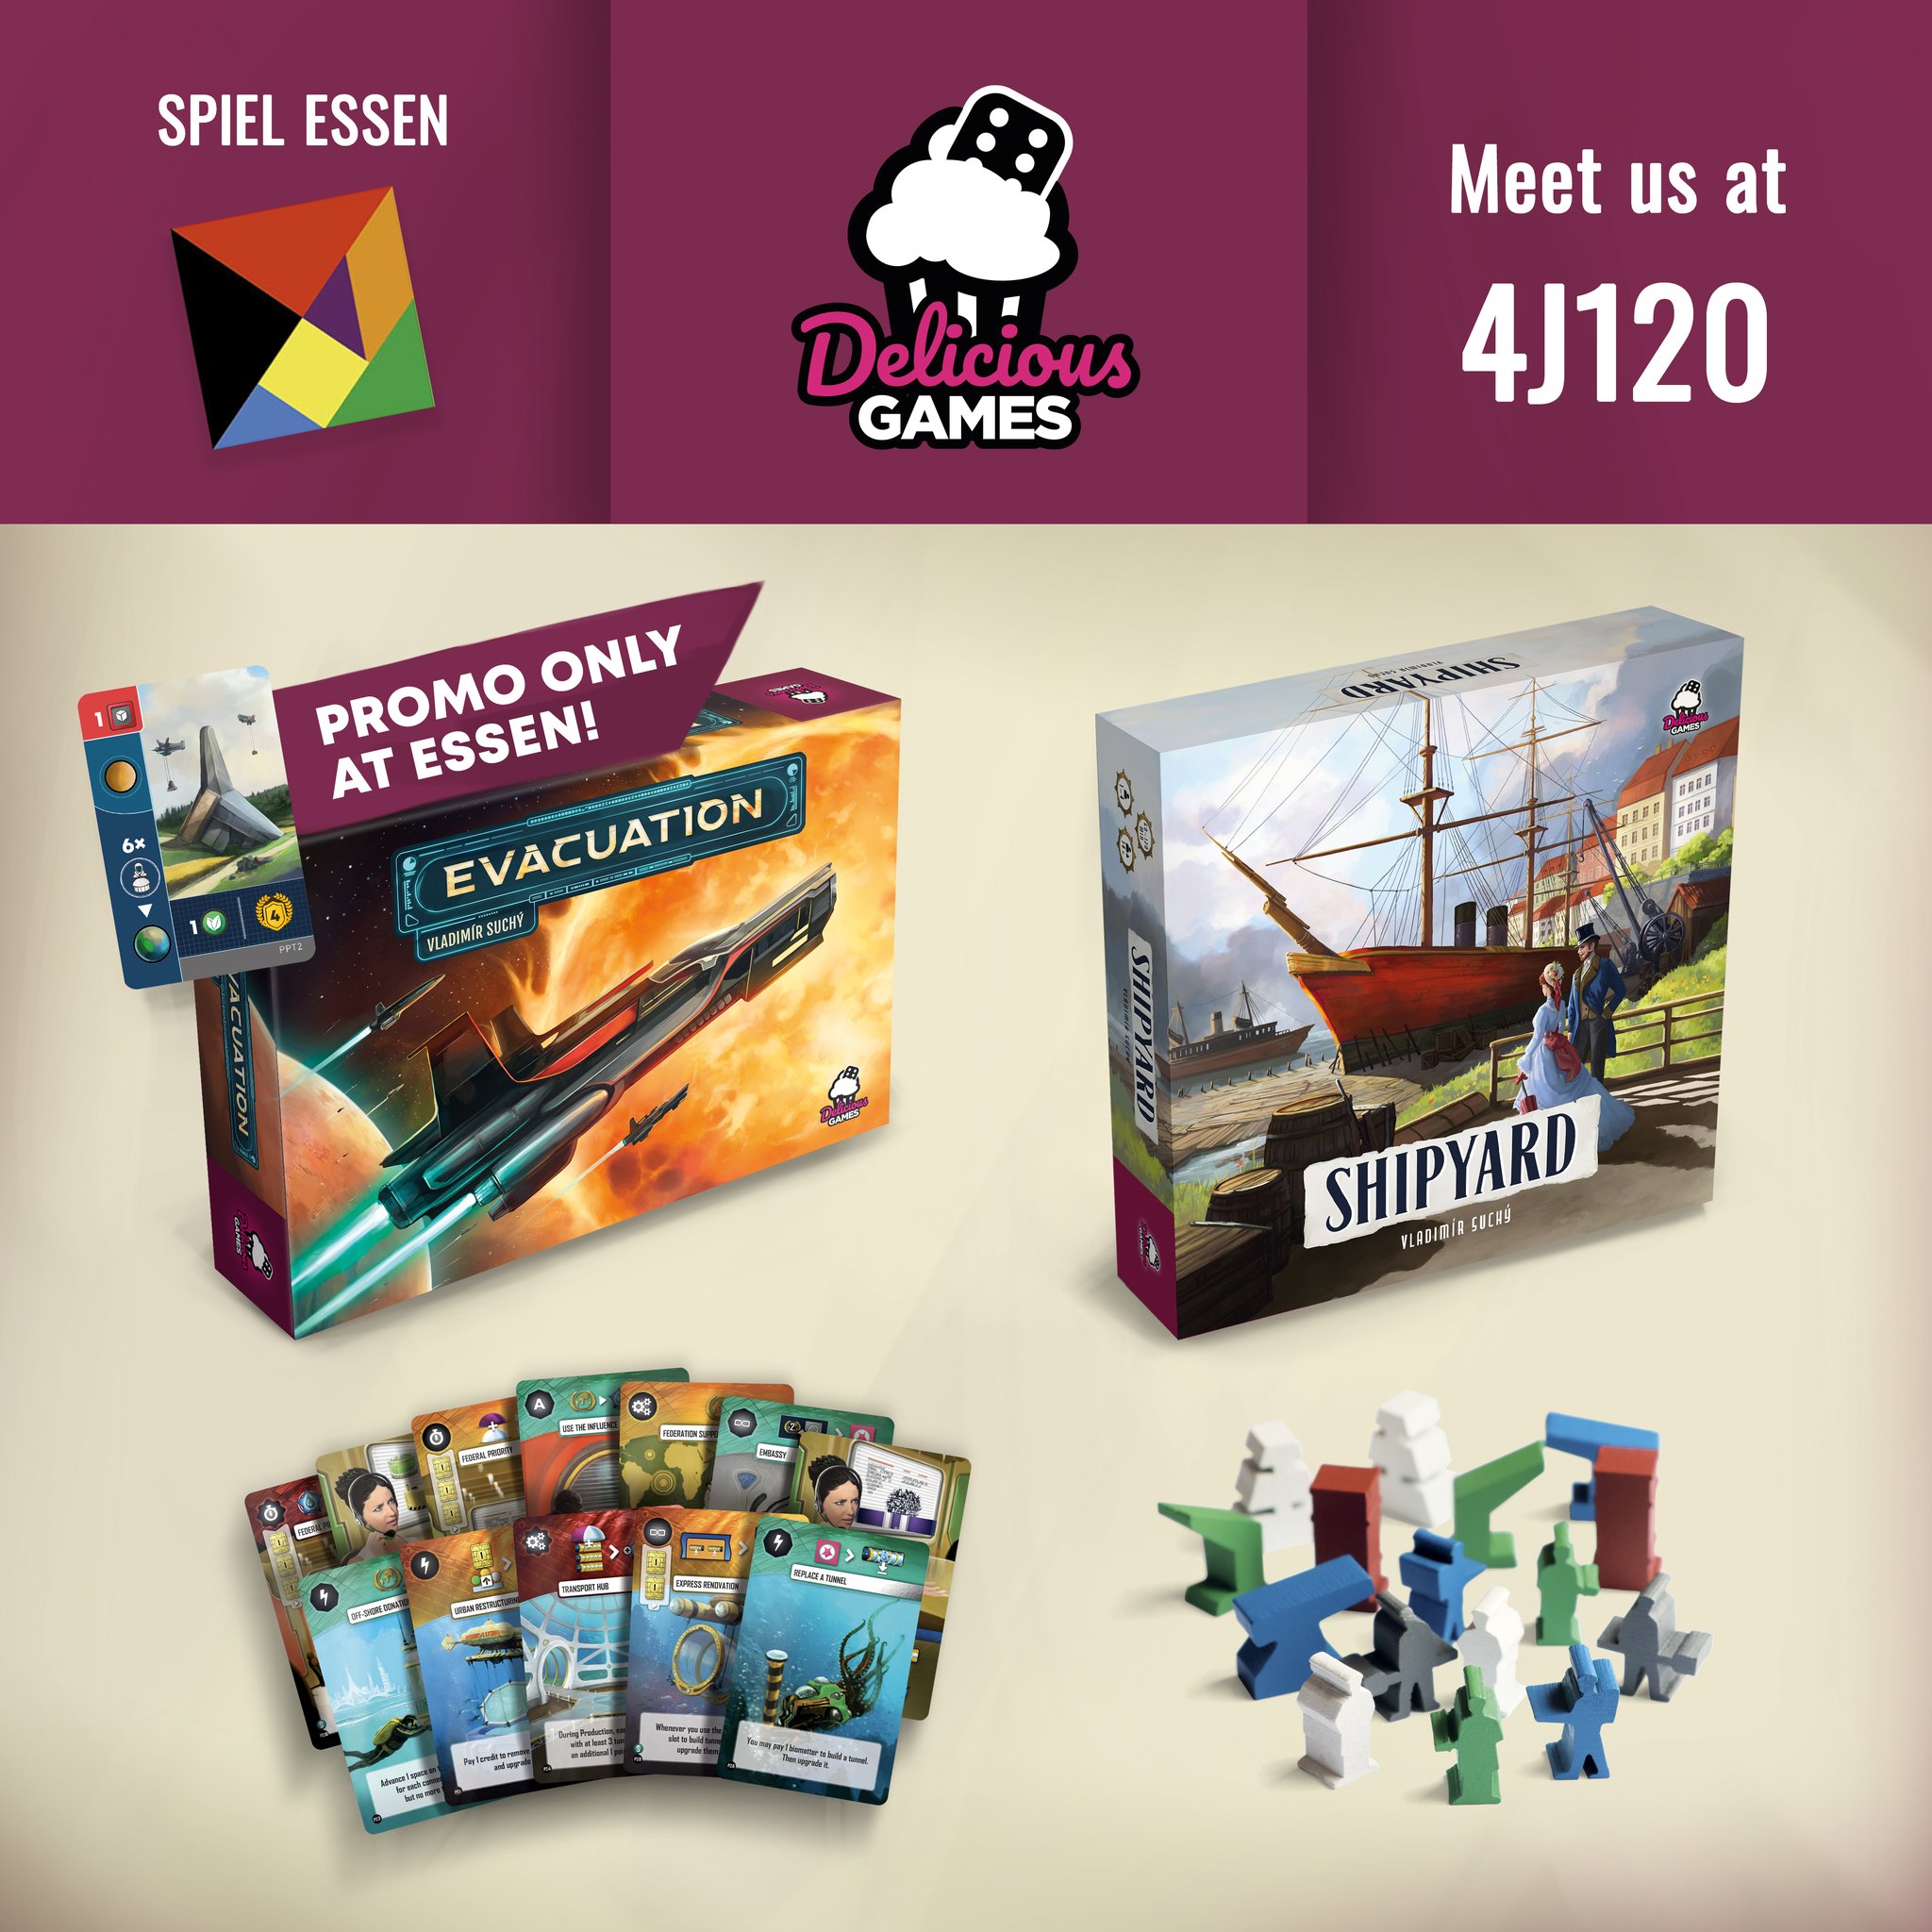 Spiel Portugal on X: And the nominees for Spiel Portugal Game of Year 2022  are: #boardgames #JogoDoAno  / X